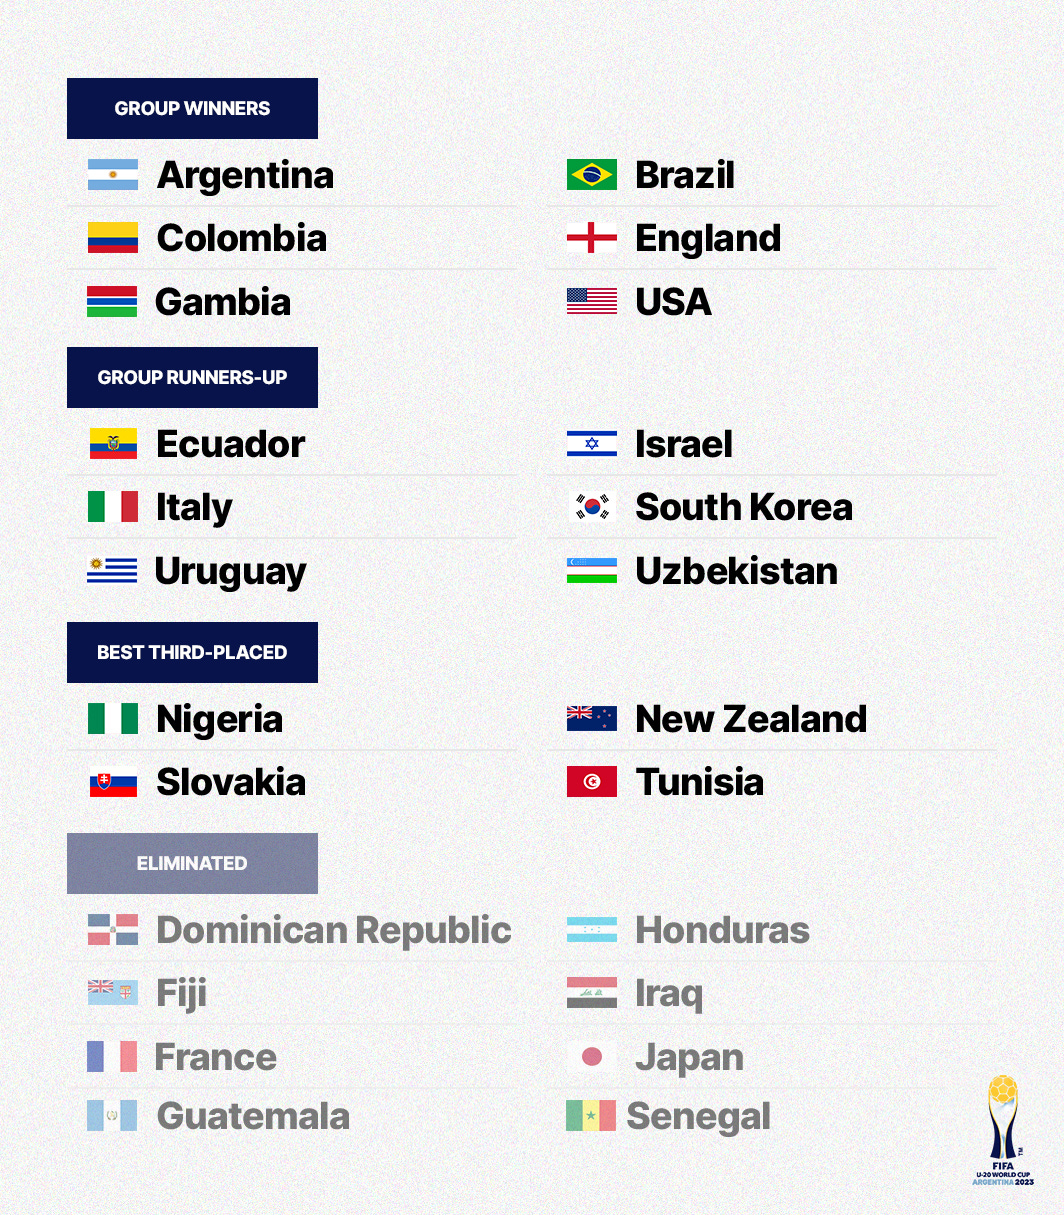 A graphic summarising the group winners, group runners-up, best third-placed teams and eleminated teams from the 2023 FIFA U-20 World Cup